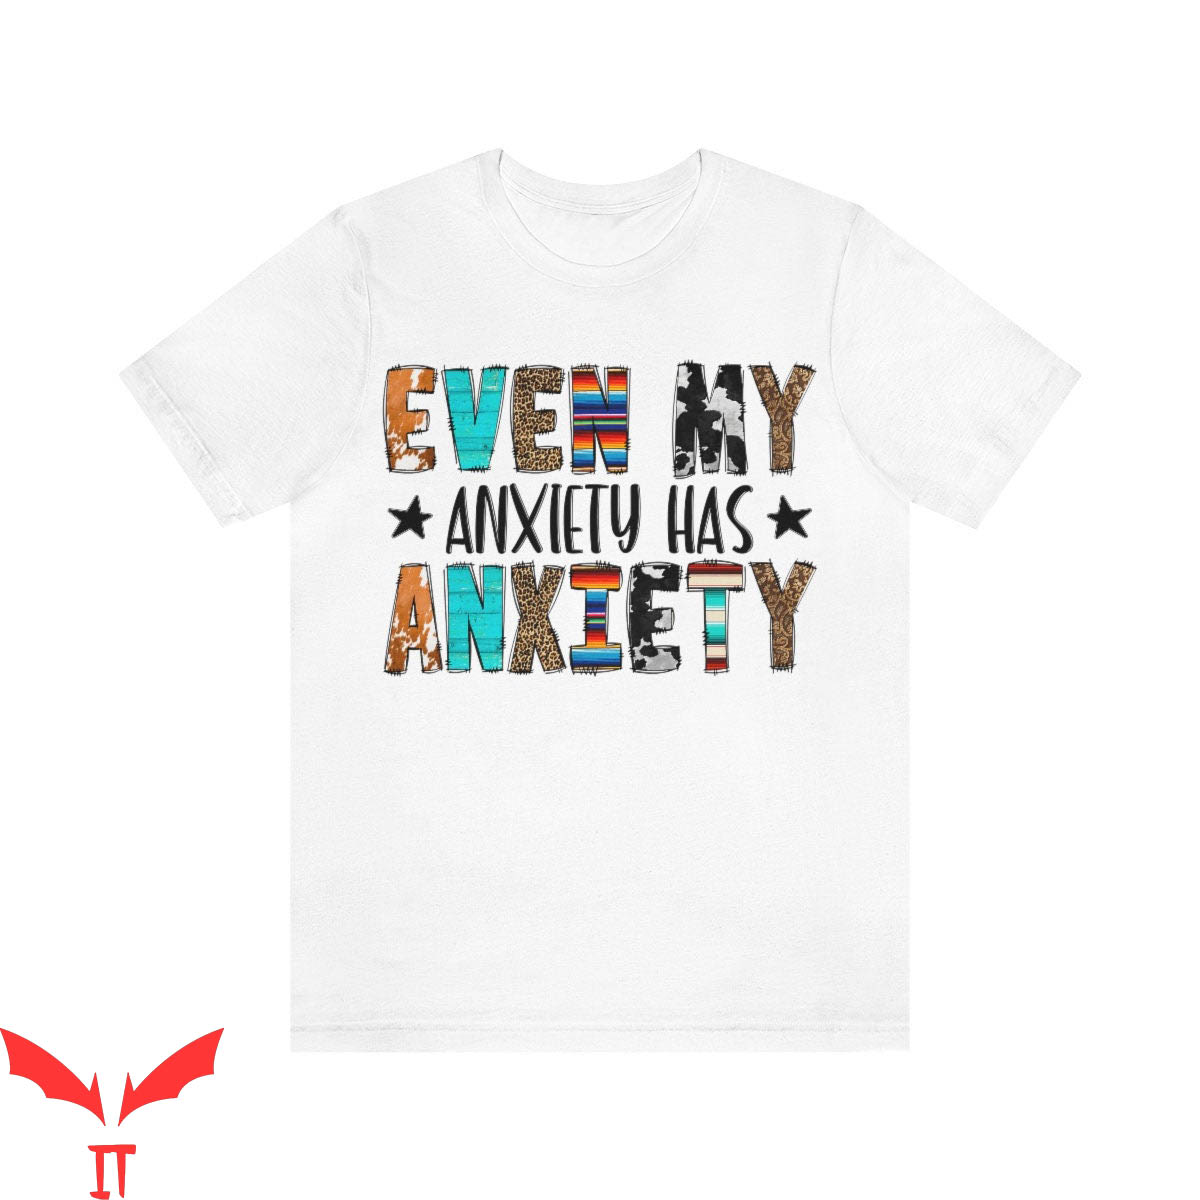 Anxiety Has Many Faces T-Shirt My Anxiety Has Anxiety